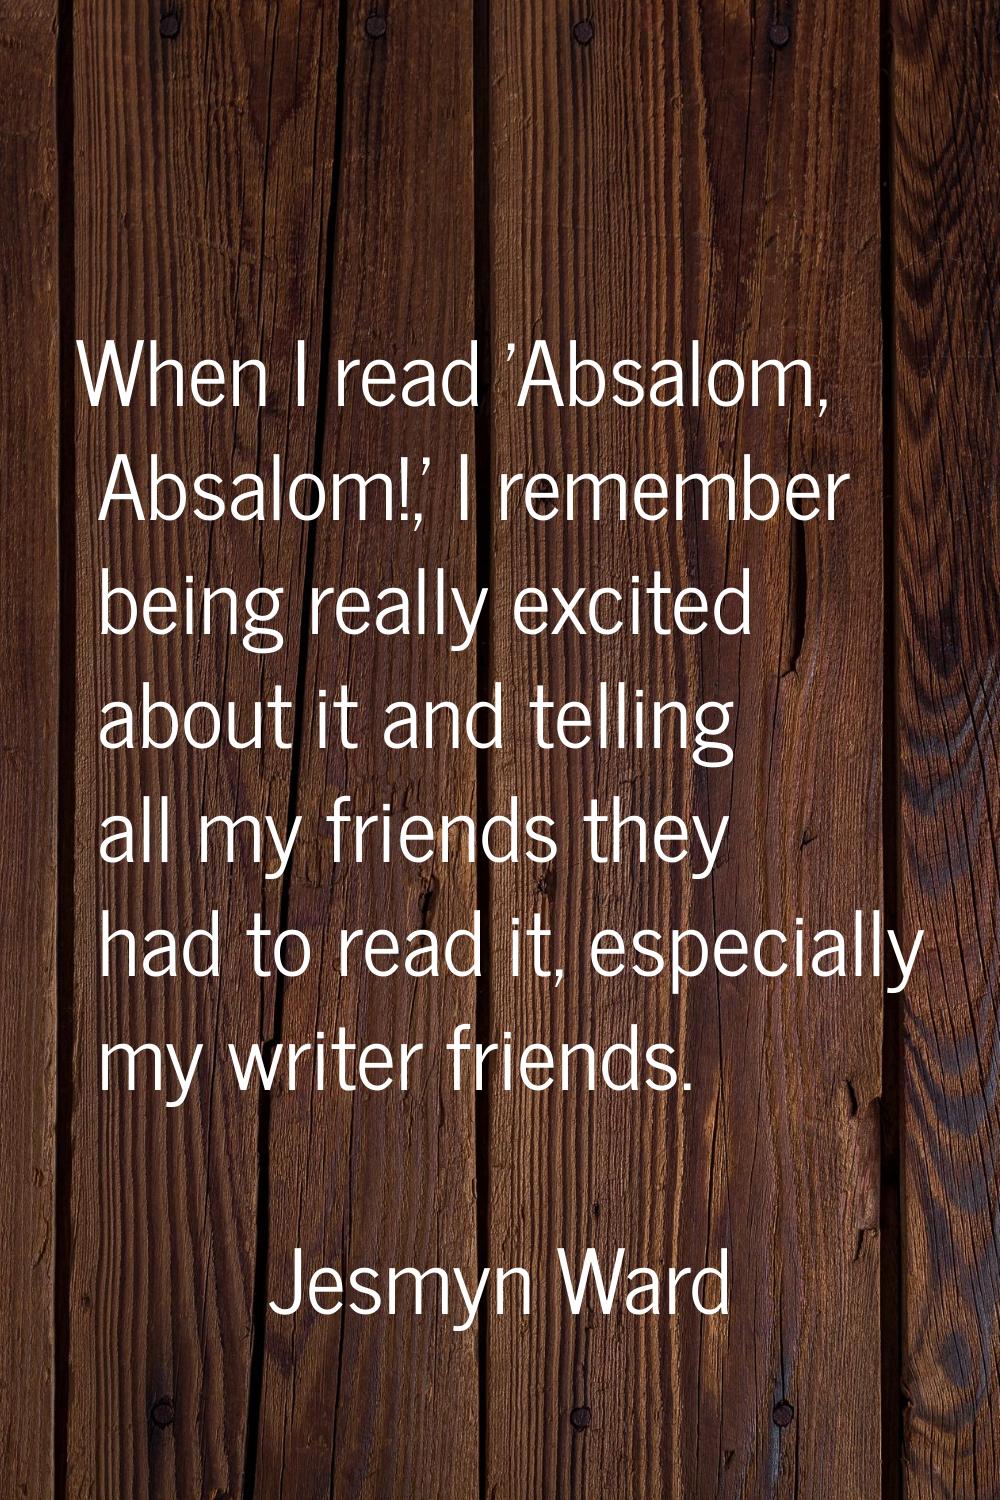 When I read 'Absalom, Absalom!,' I remember being really excited about it and telling all my friend